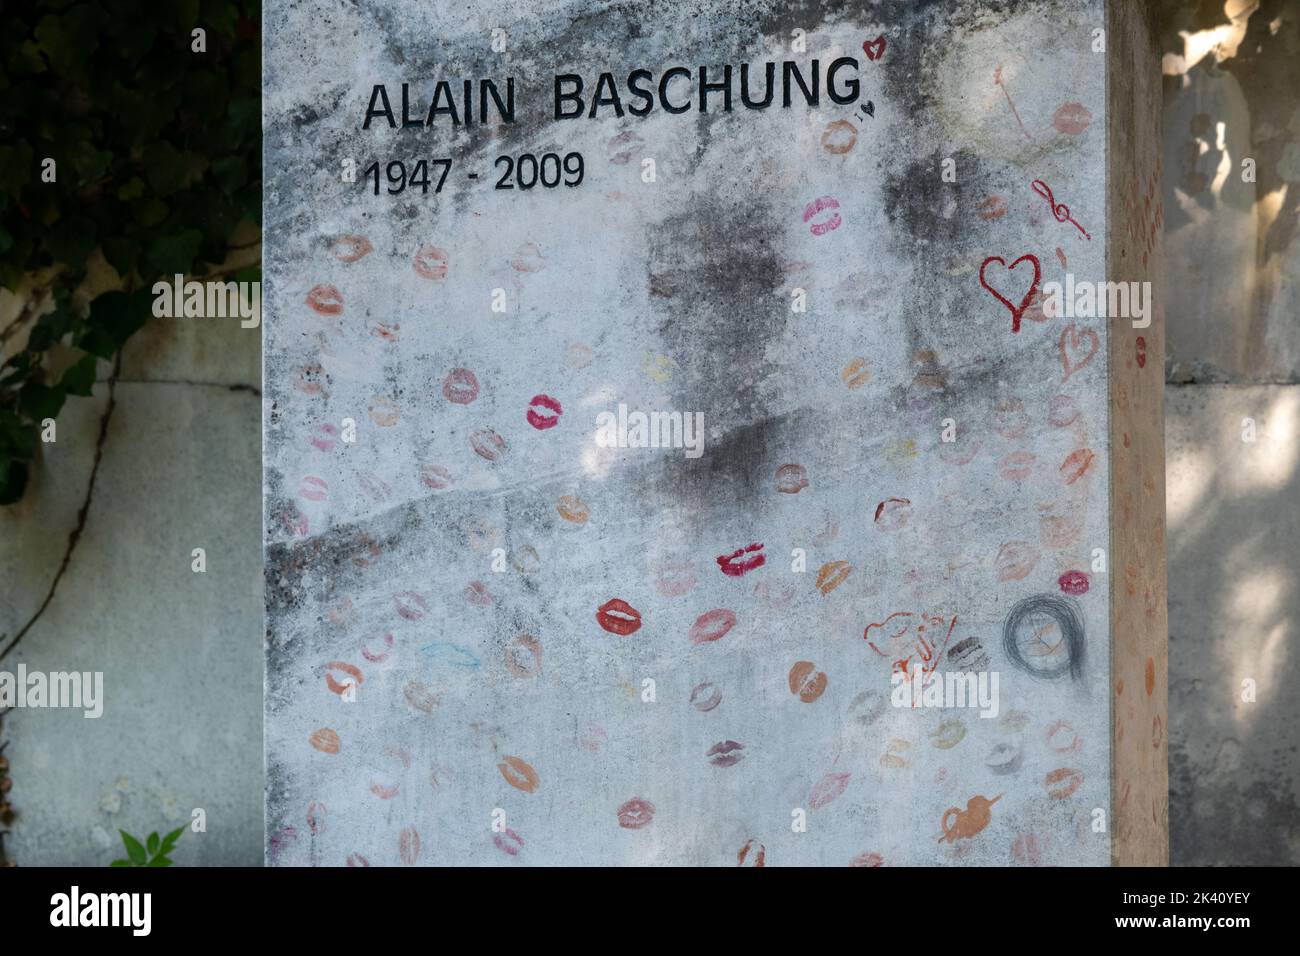 Paris, France - 31 August 2022: Alain Bashung Tombstone at Pere-Lachaise cemetery Stock Photo